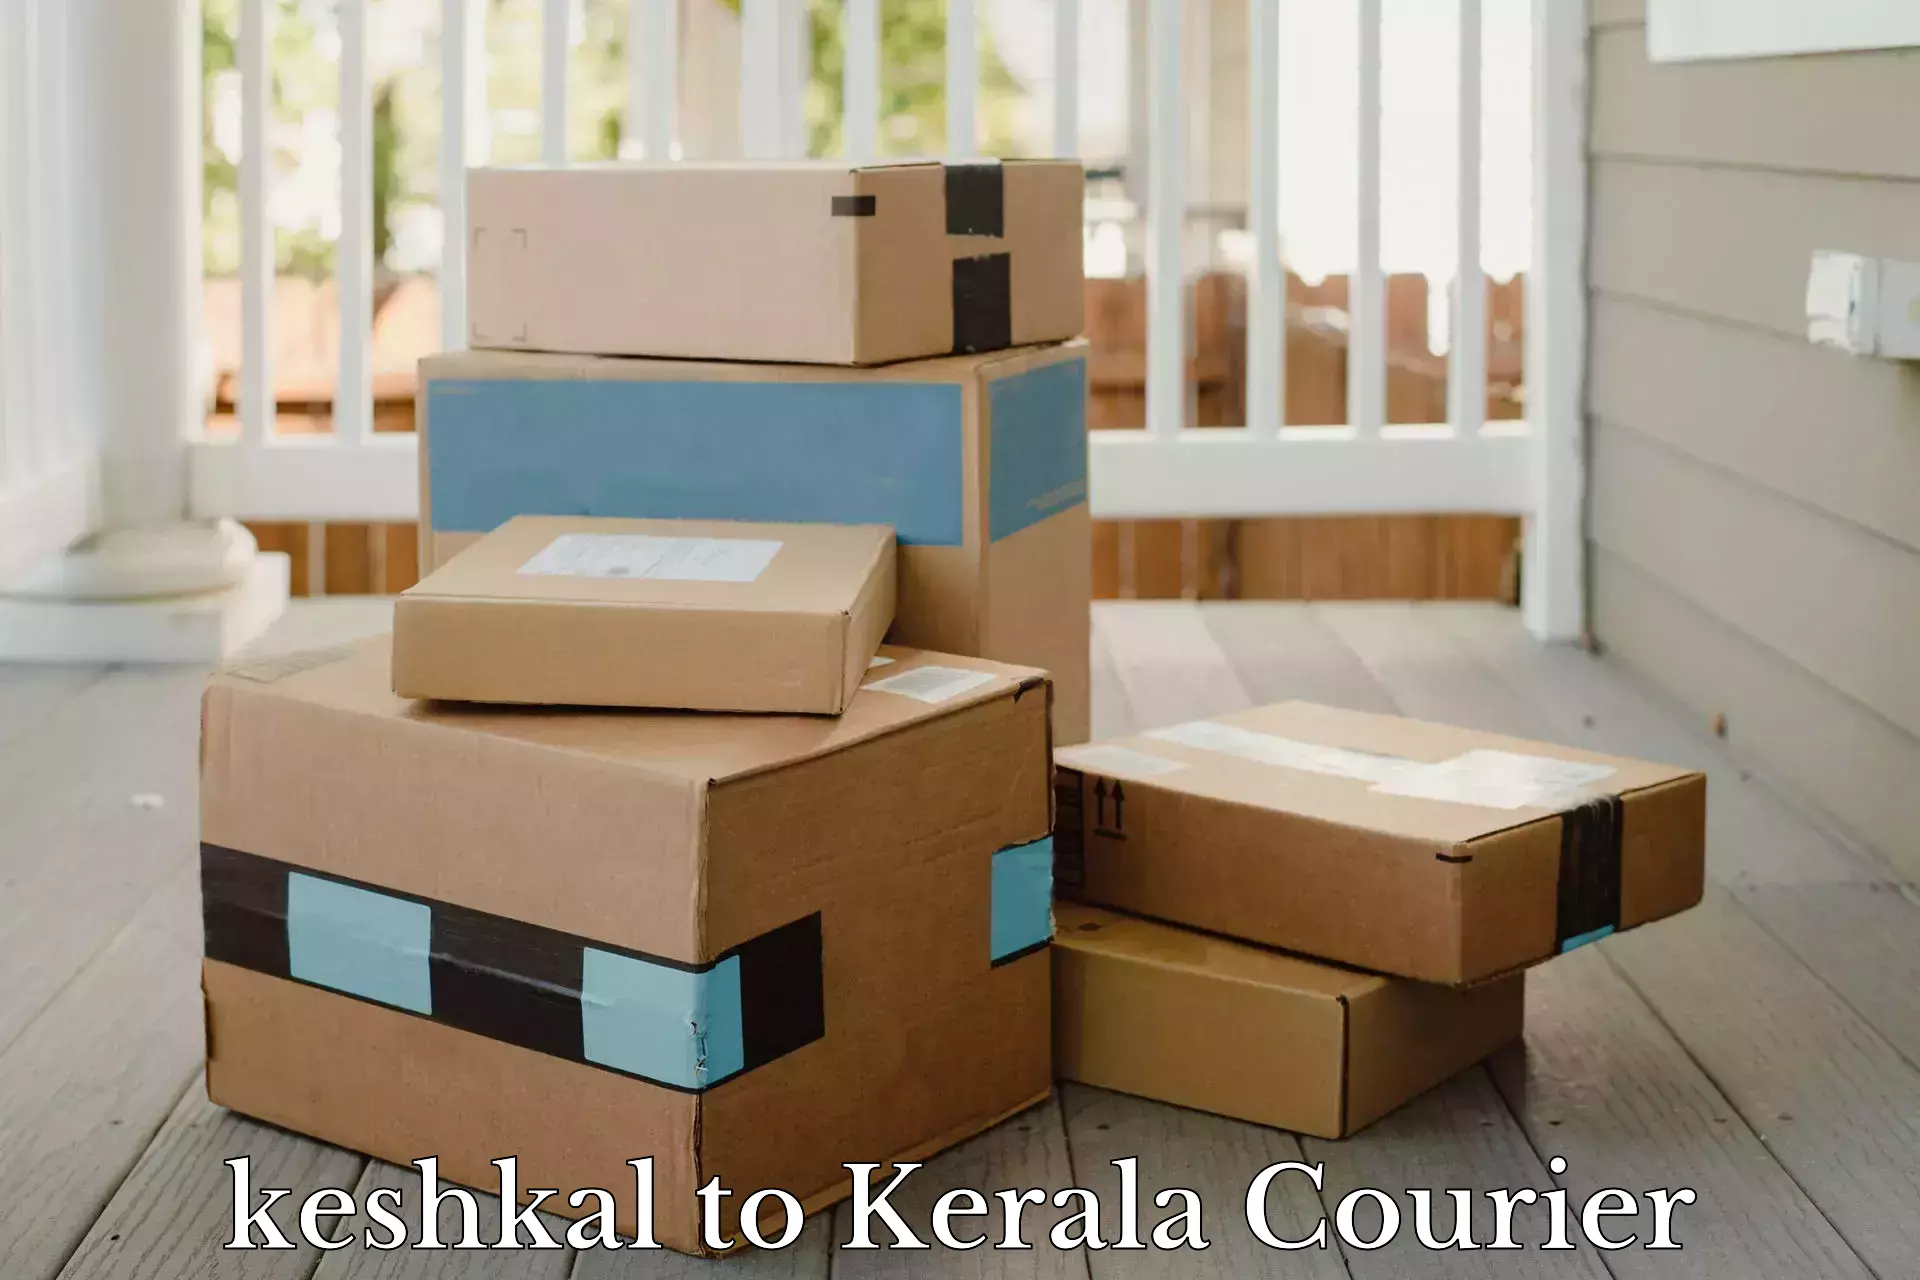 End-to-end delivery keshkal to Kalluvathukkal